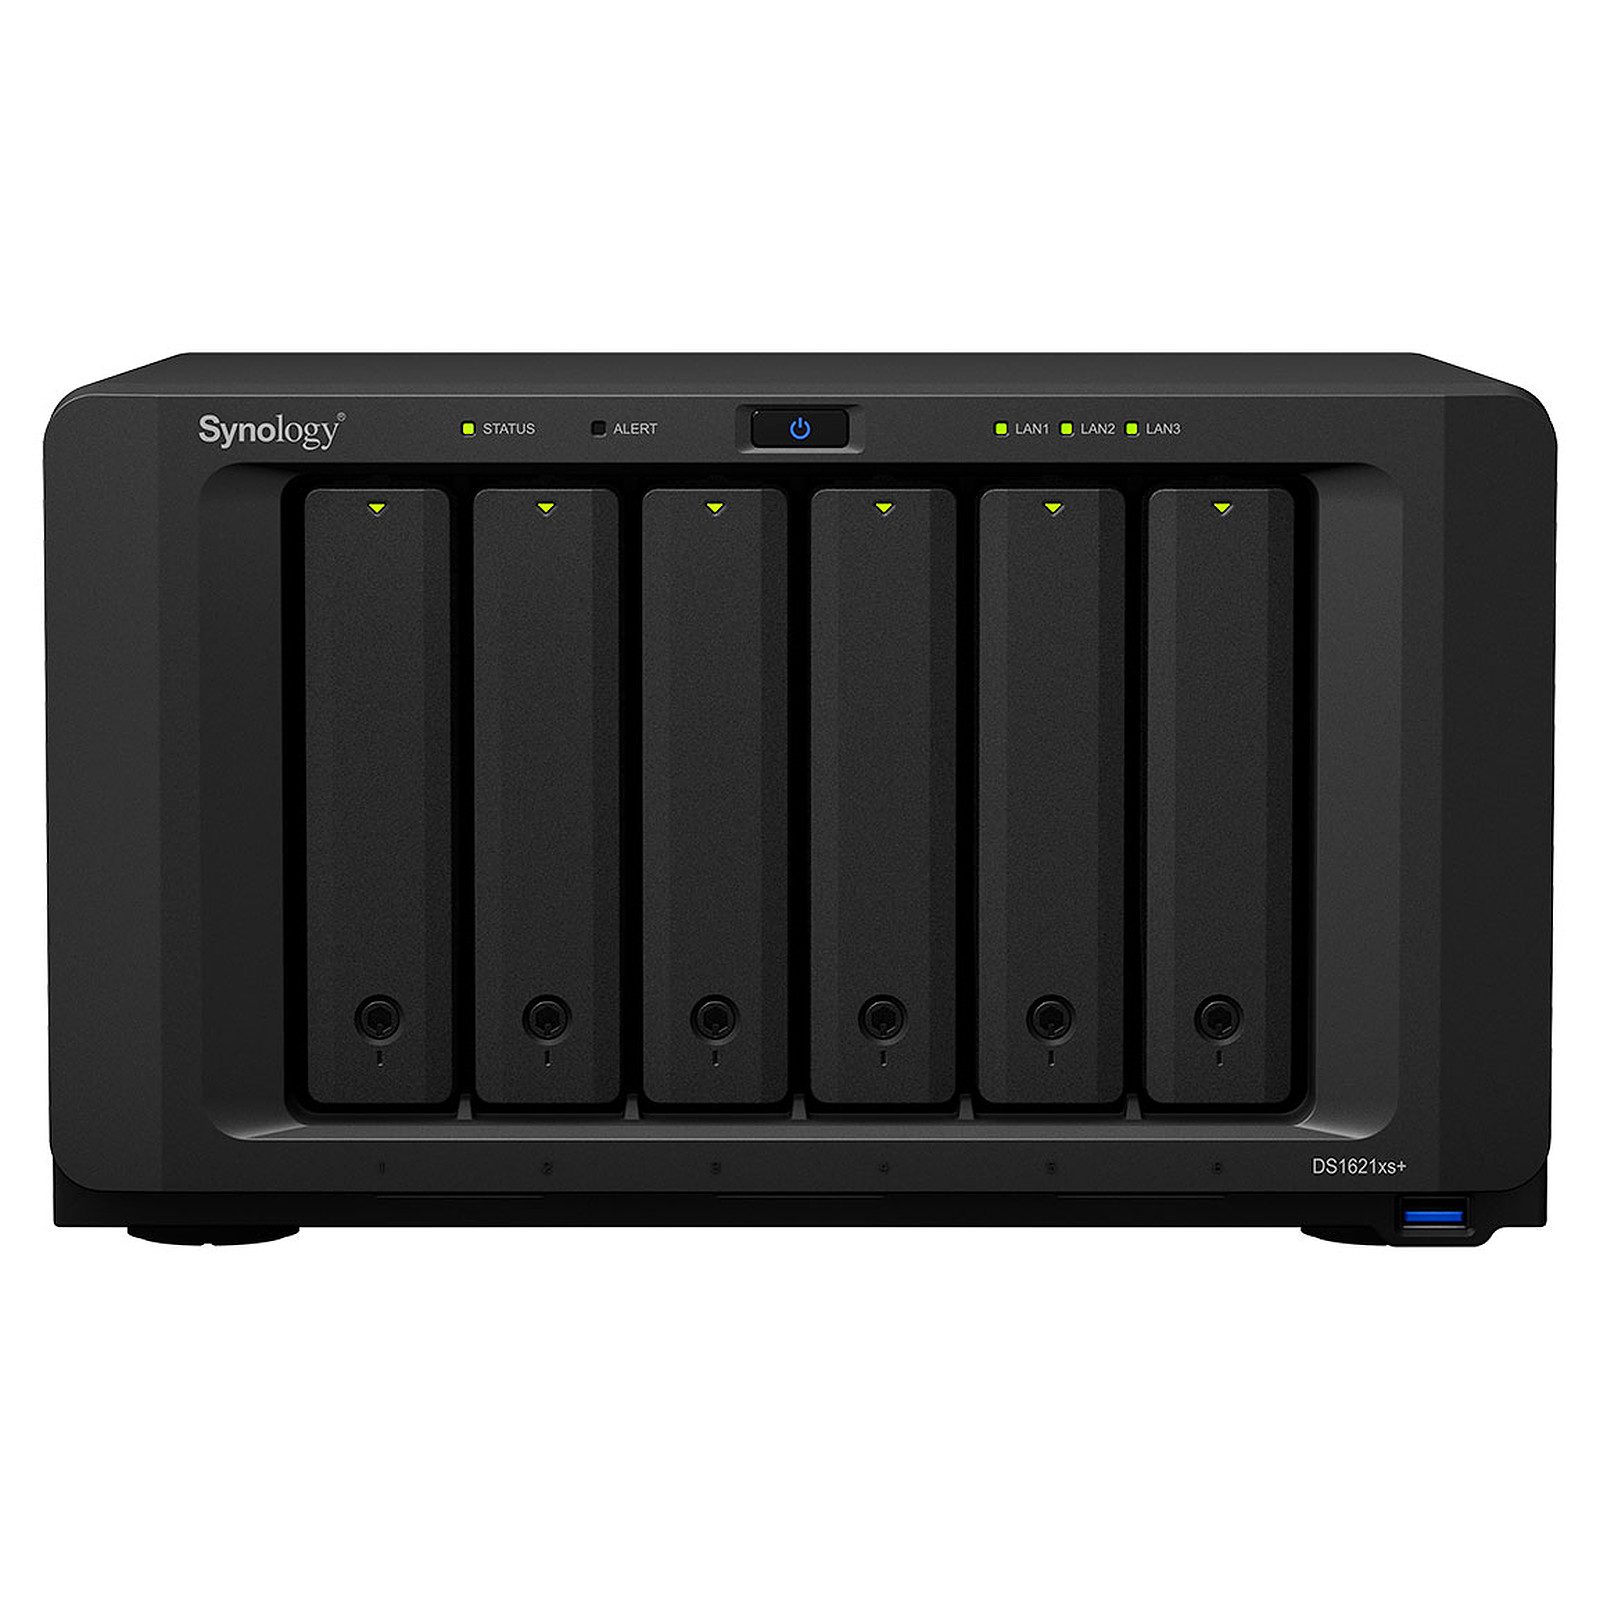 Synology DiskStation DS1621xs+ - Serveur NAS Synology